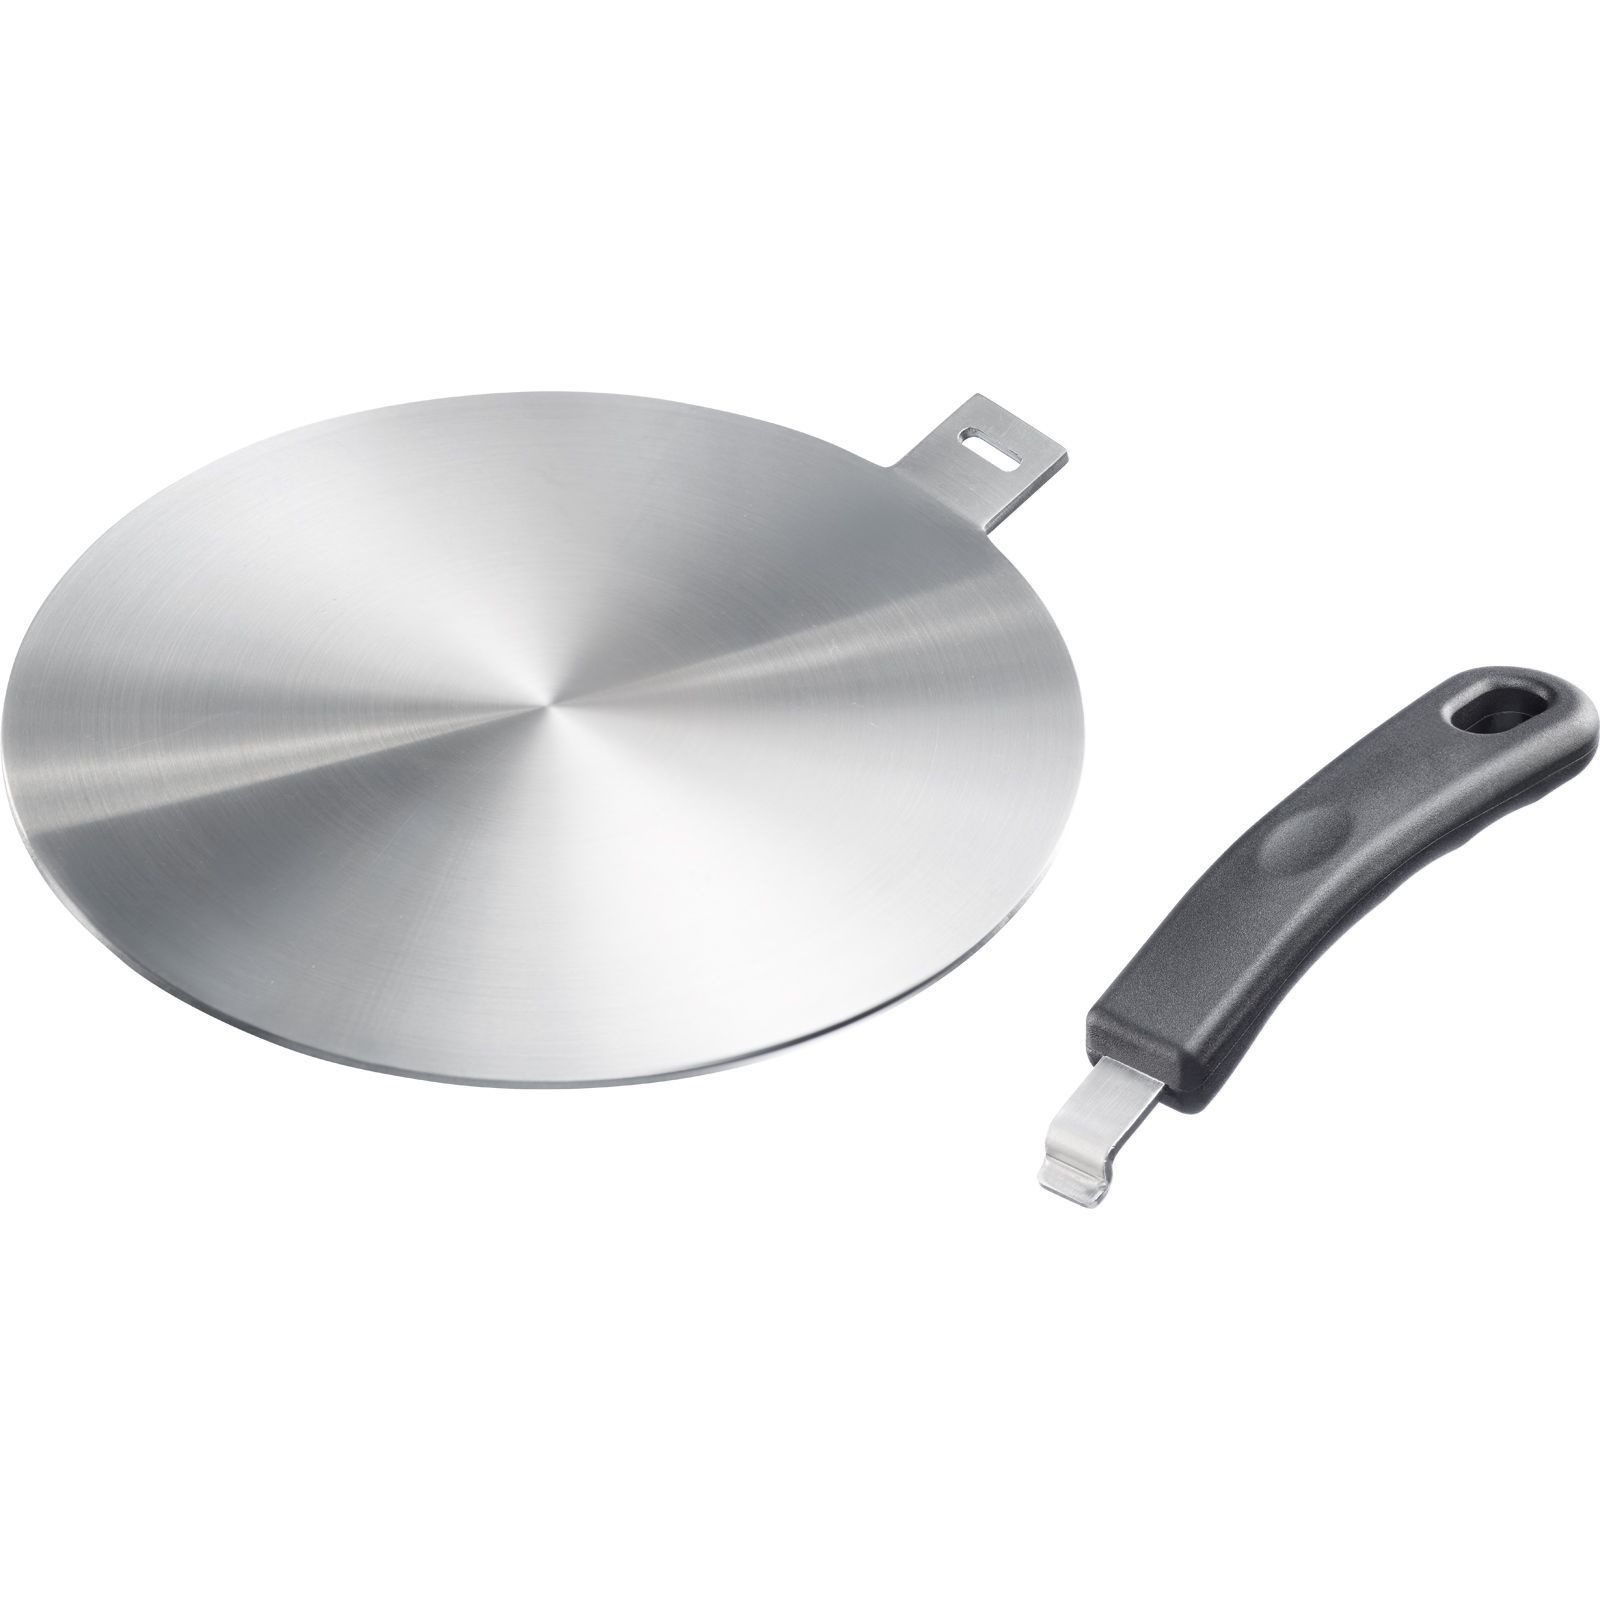 Induction adapter plate, stainless steel, 14cm - Westmark